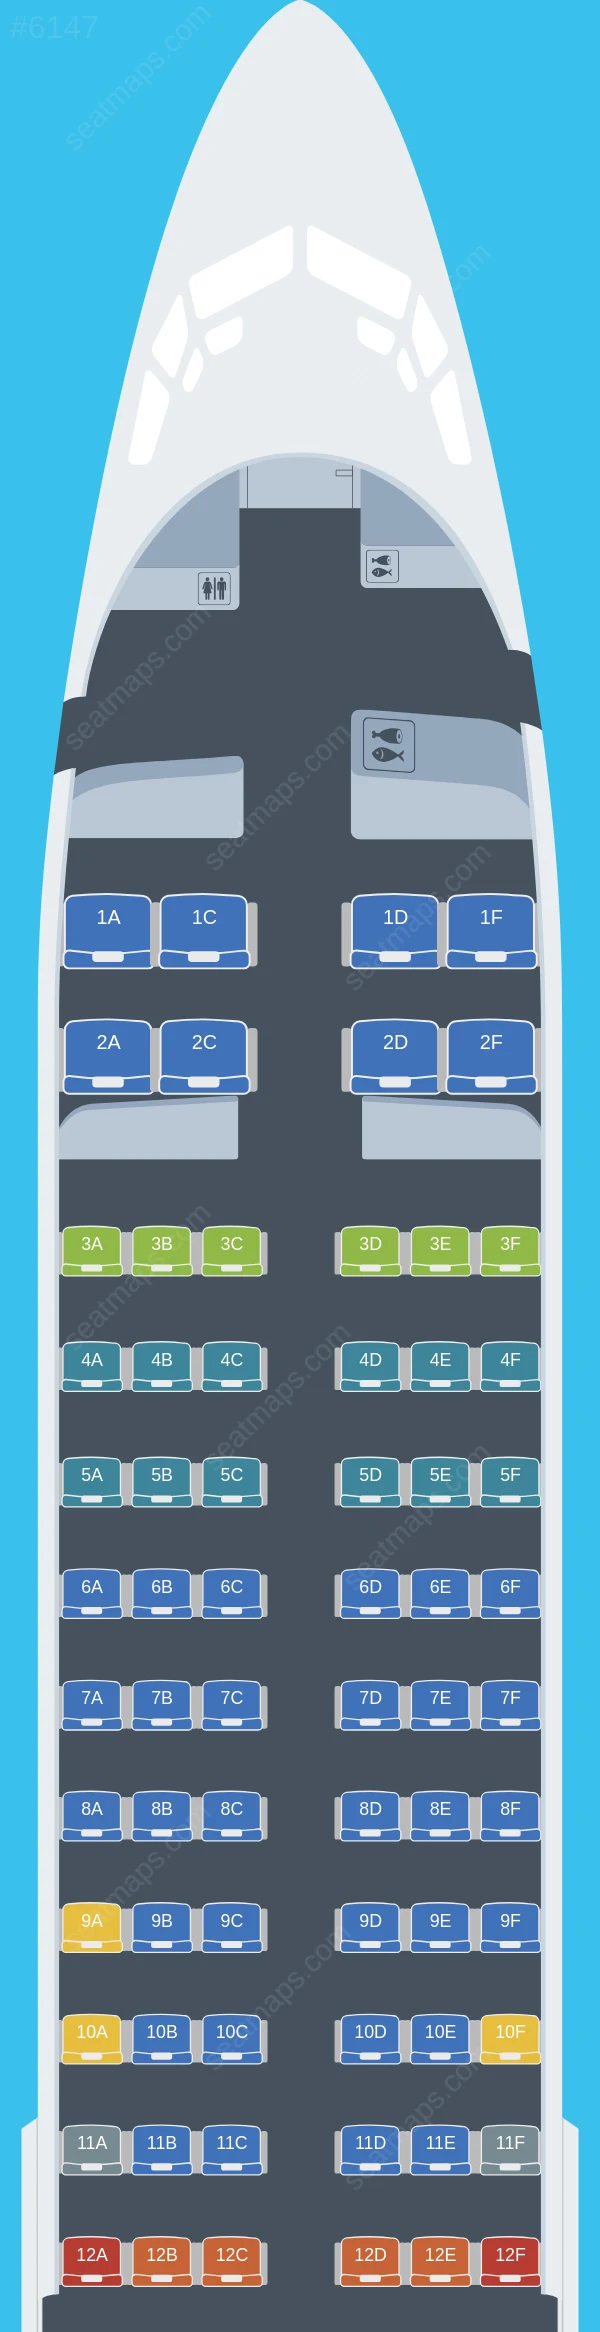 Shandong Airlines Boeing 737-800 V.1 seatmap preview